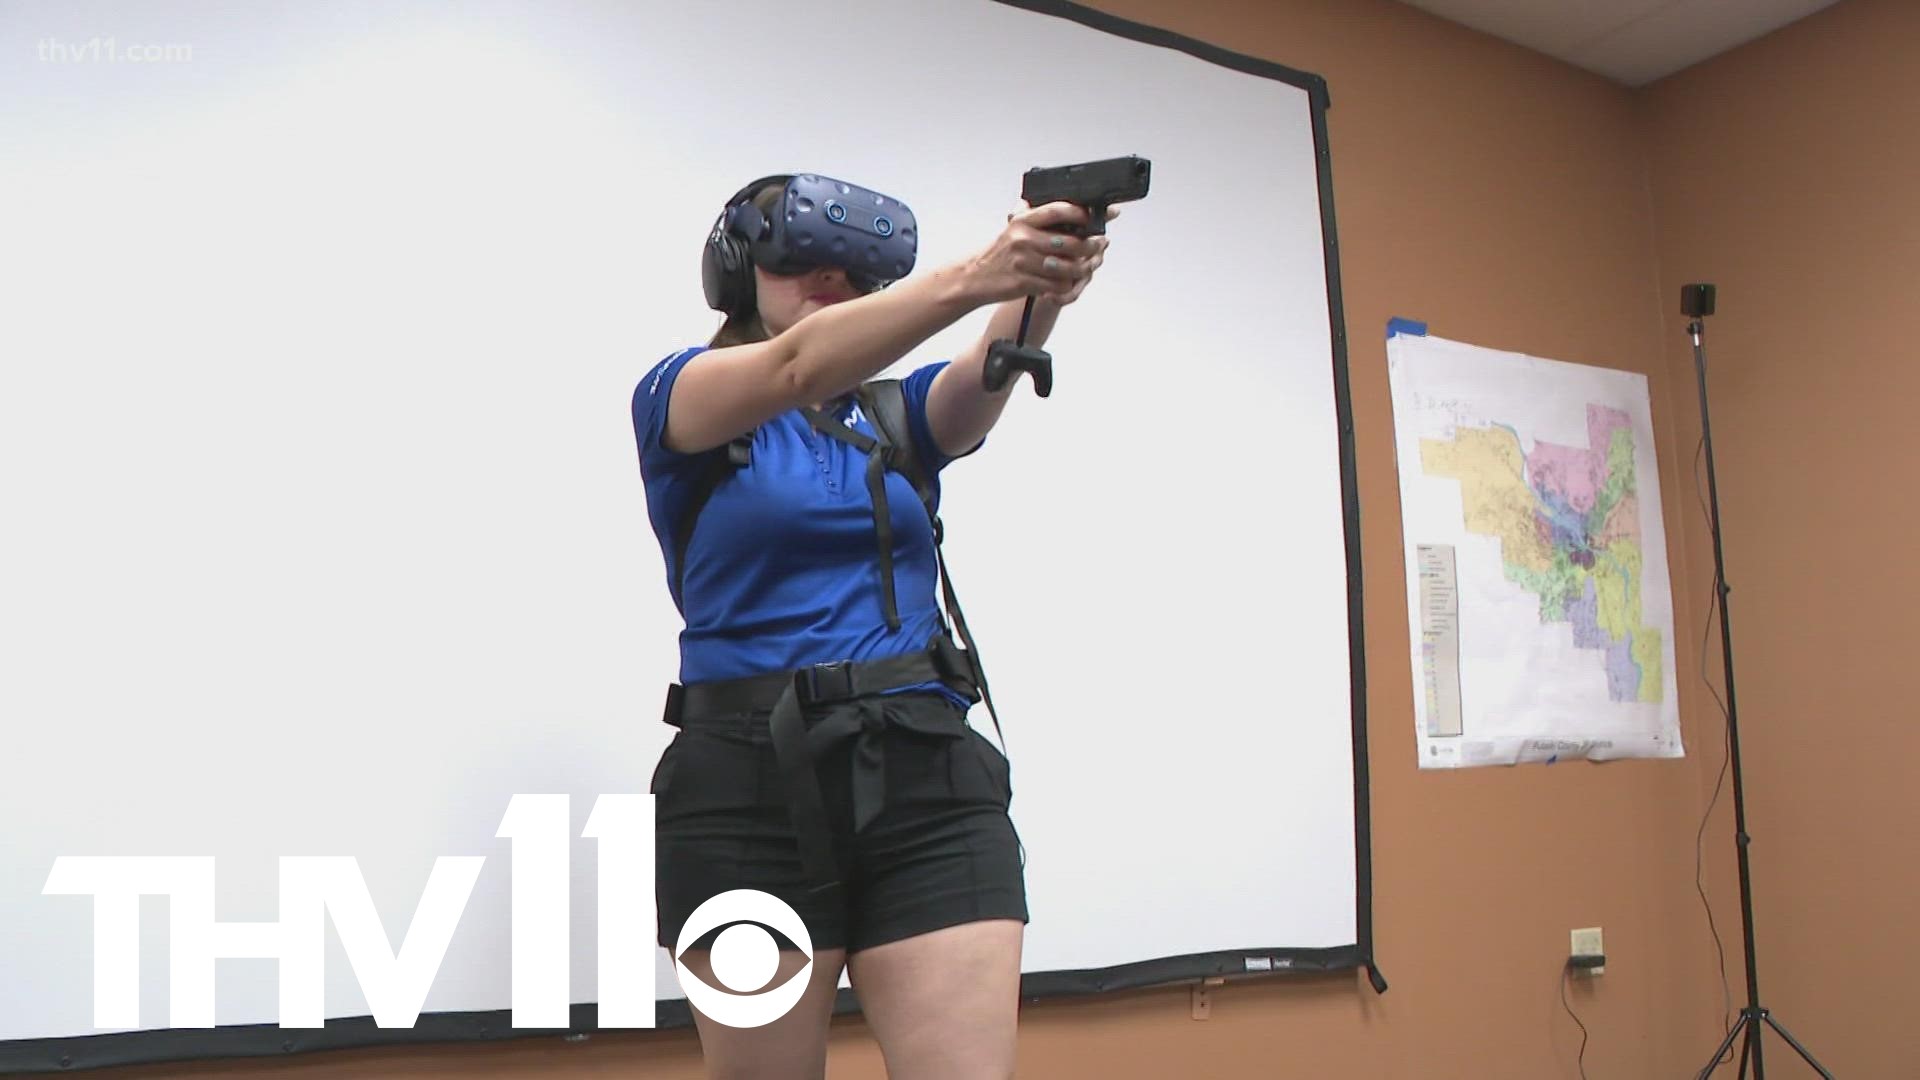 The system will allow deputies to experience real-life scenarios in virtual reality to help prepare them for what they could encounter in the field.